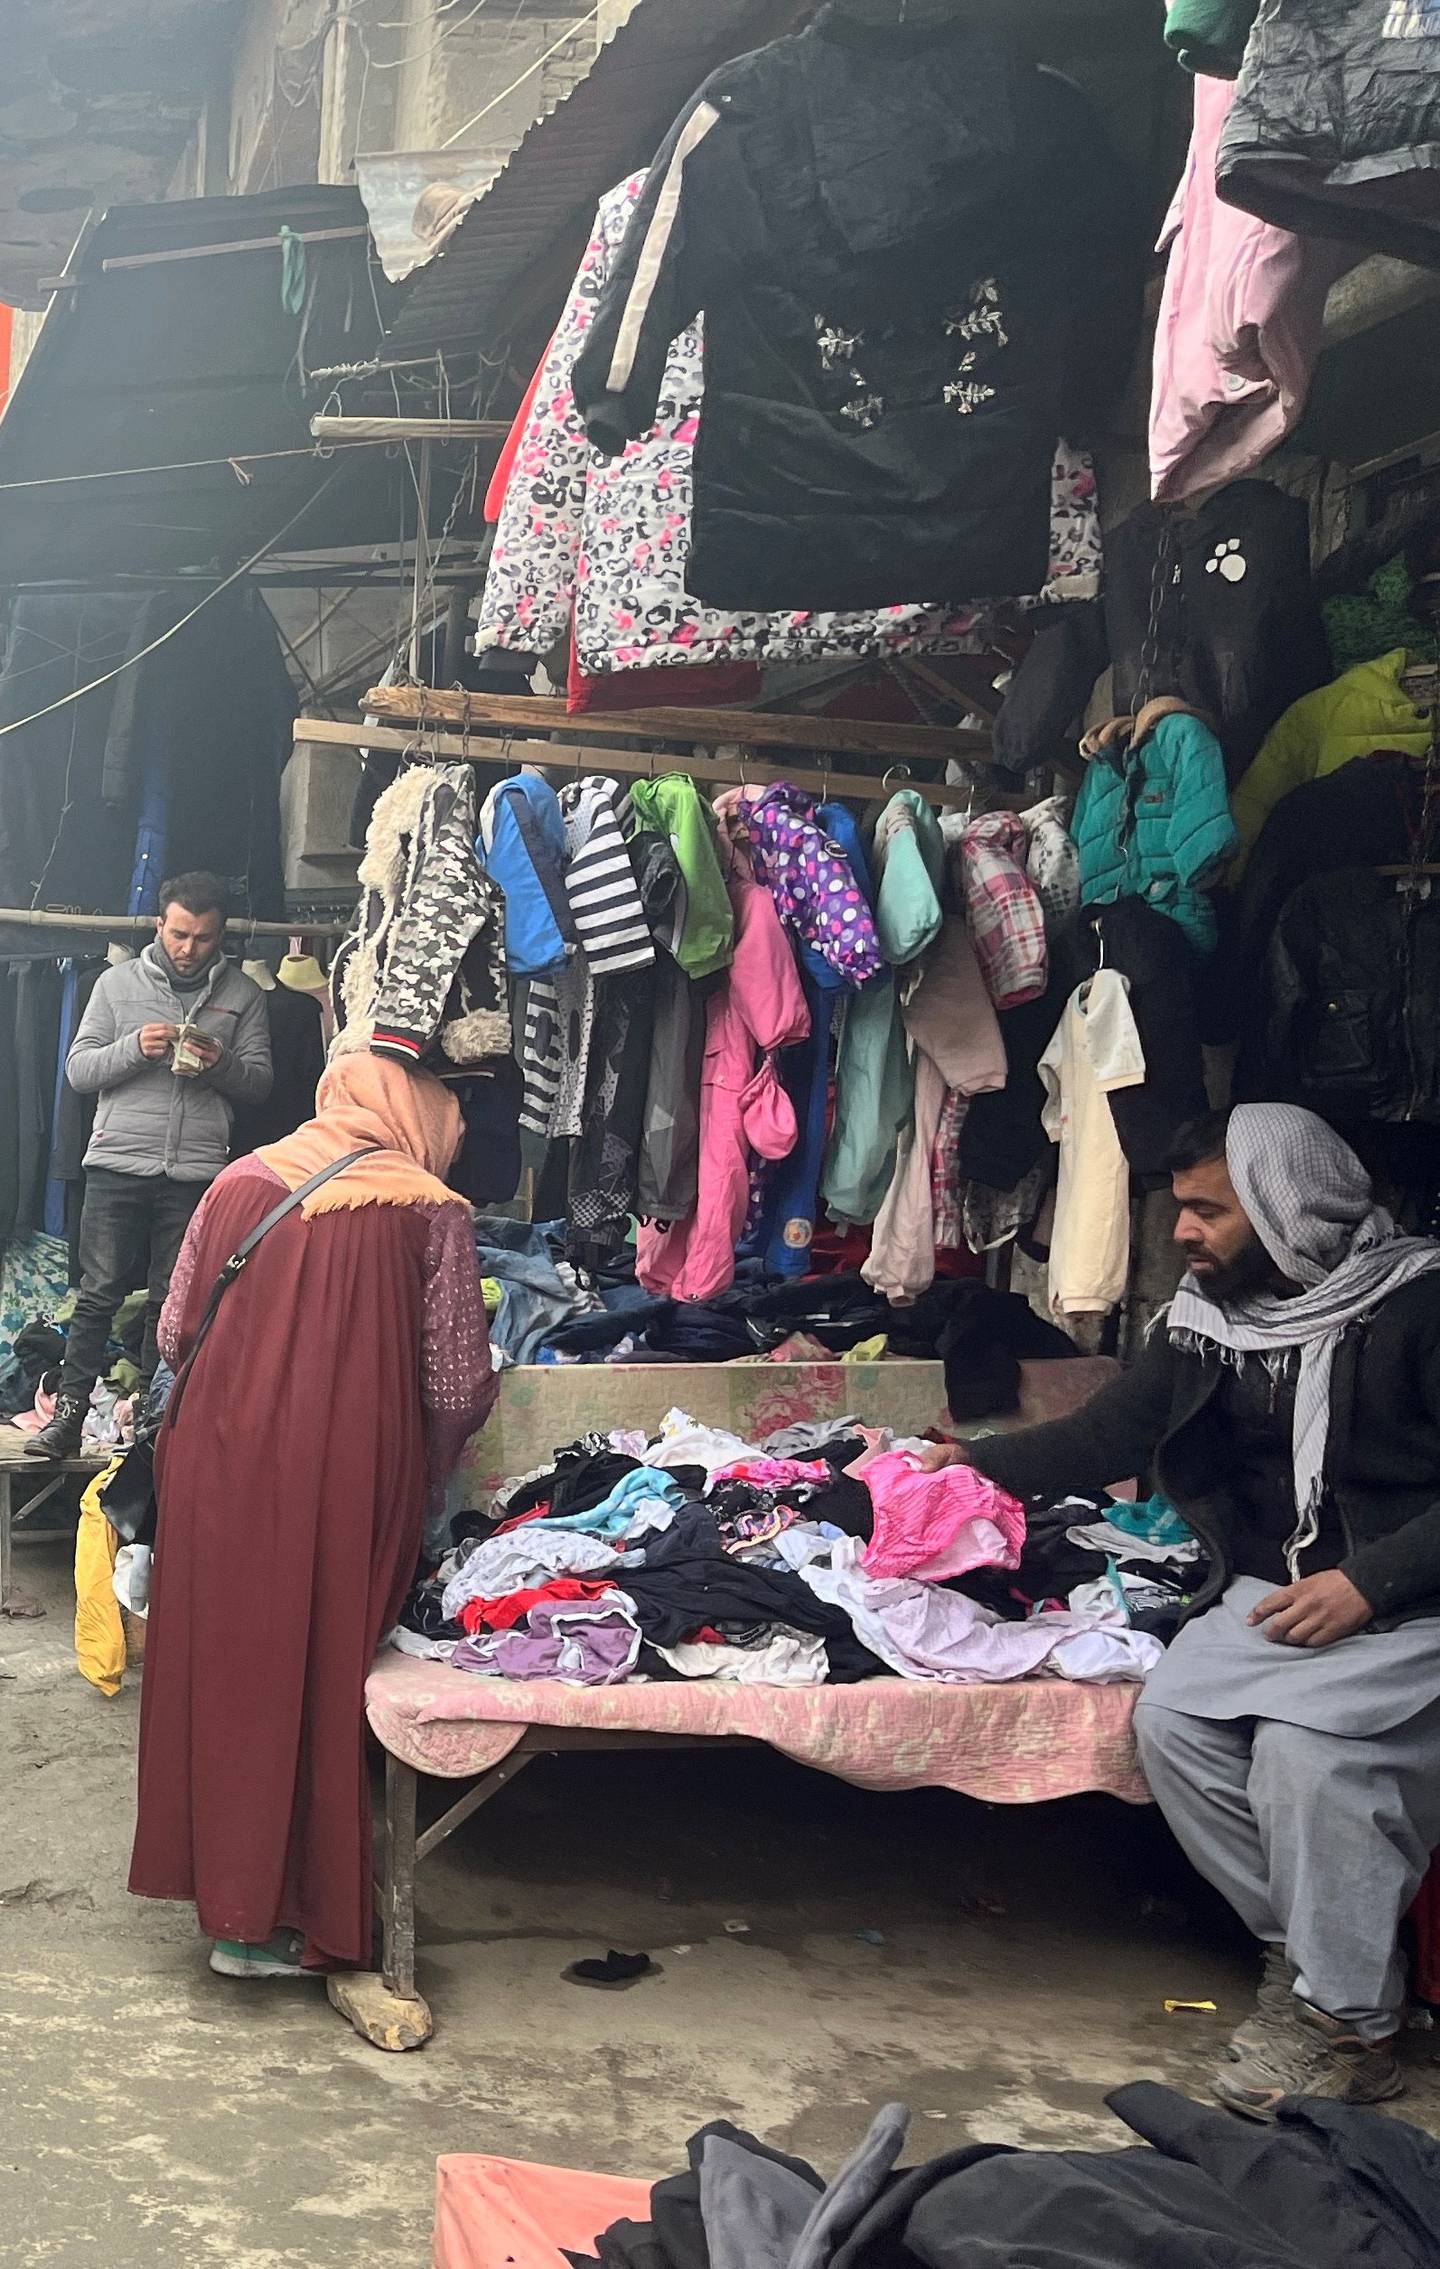 As temperatures increase, tradesmen say people are less inclined to shop. Photo: Ali M Latifi